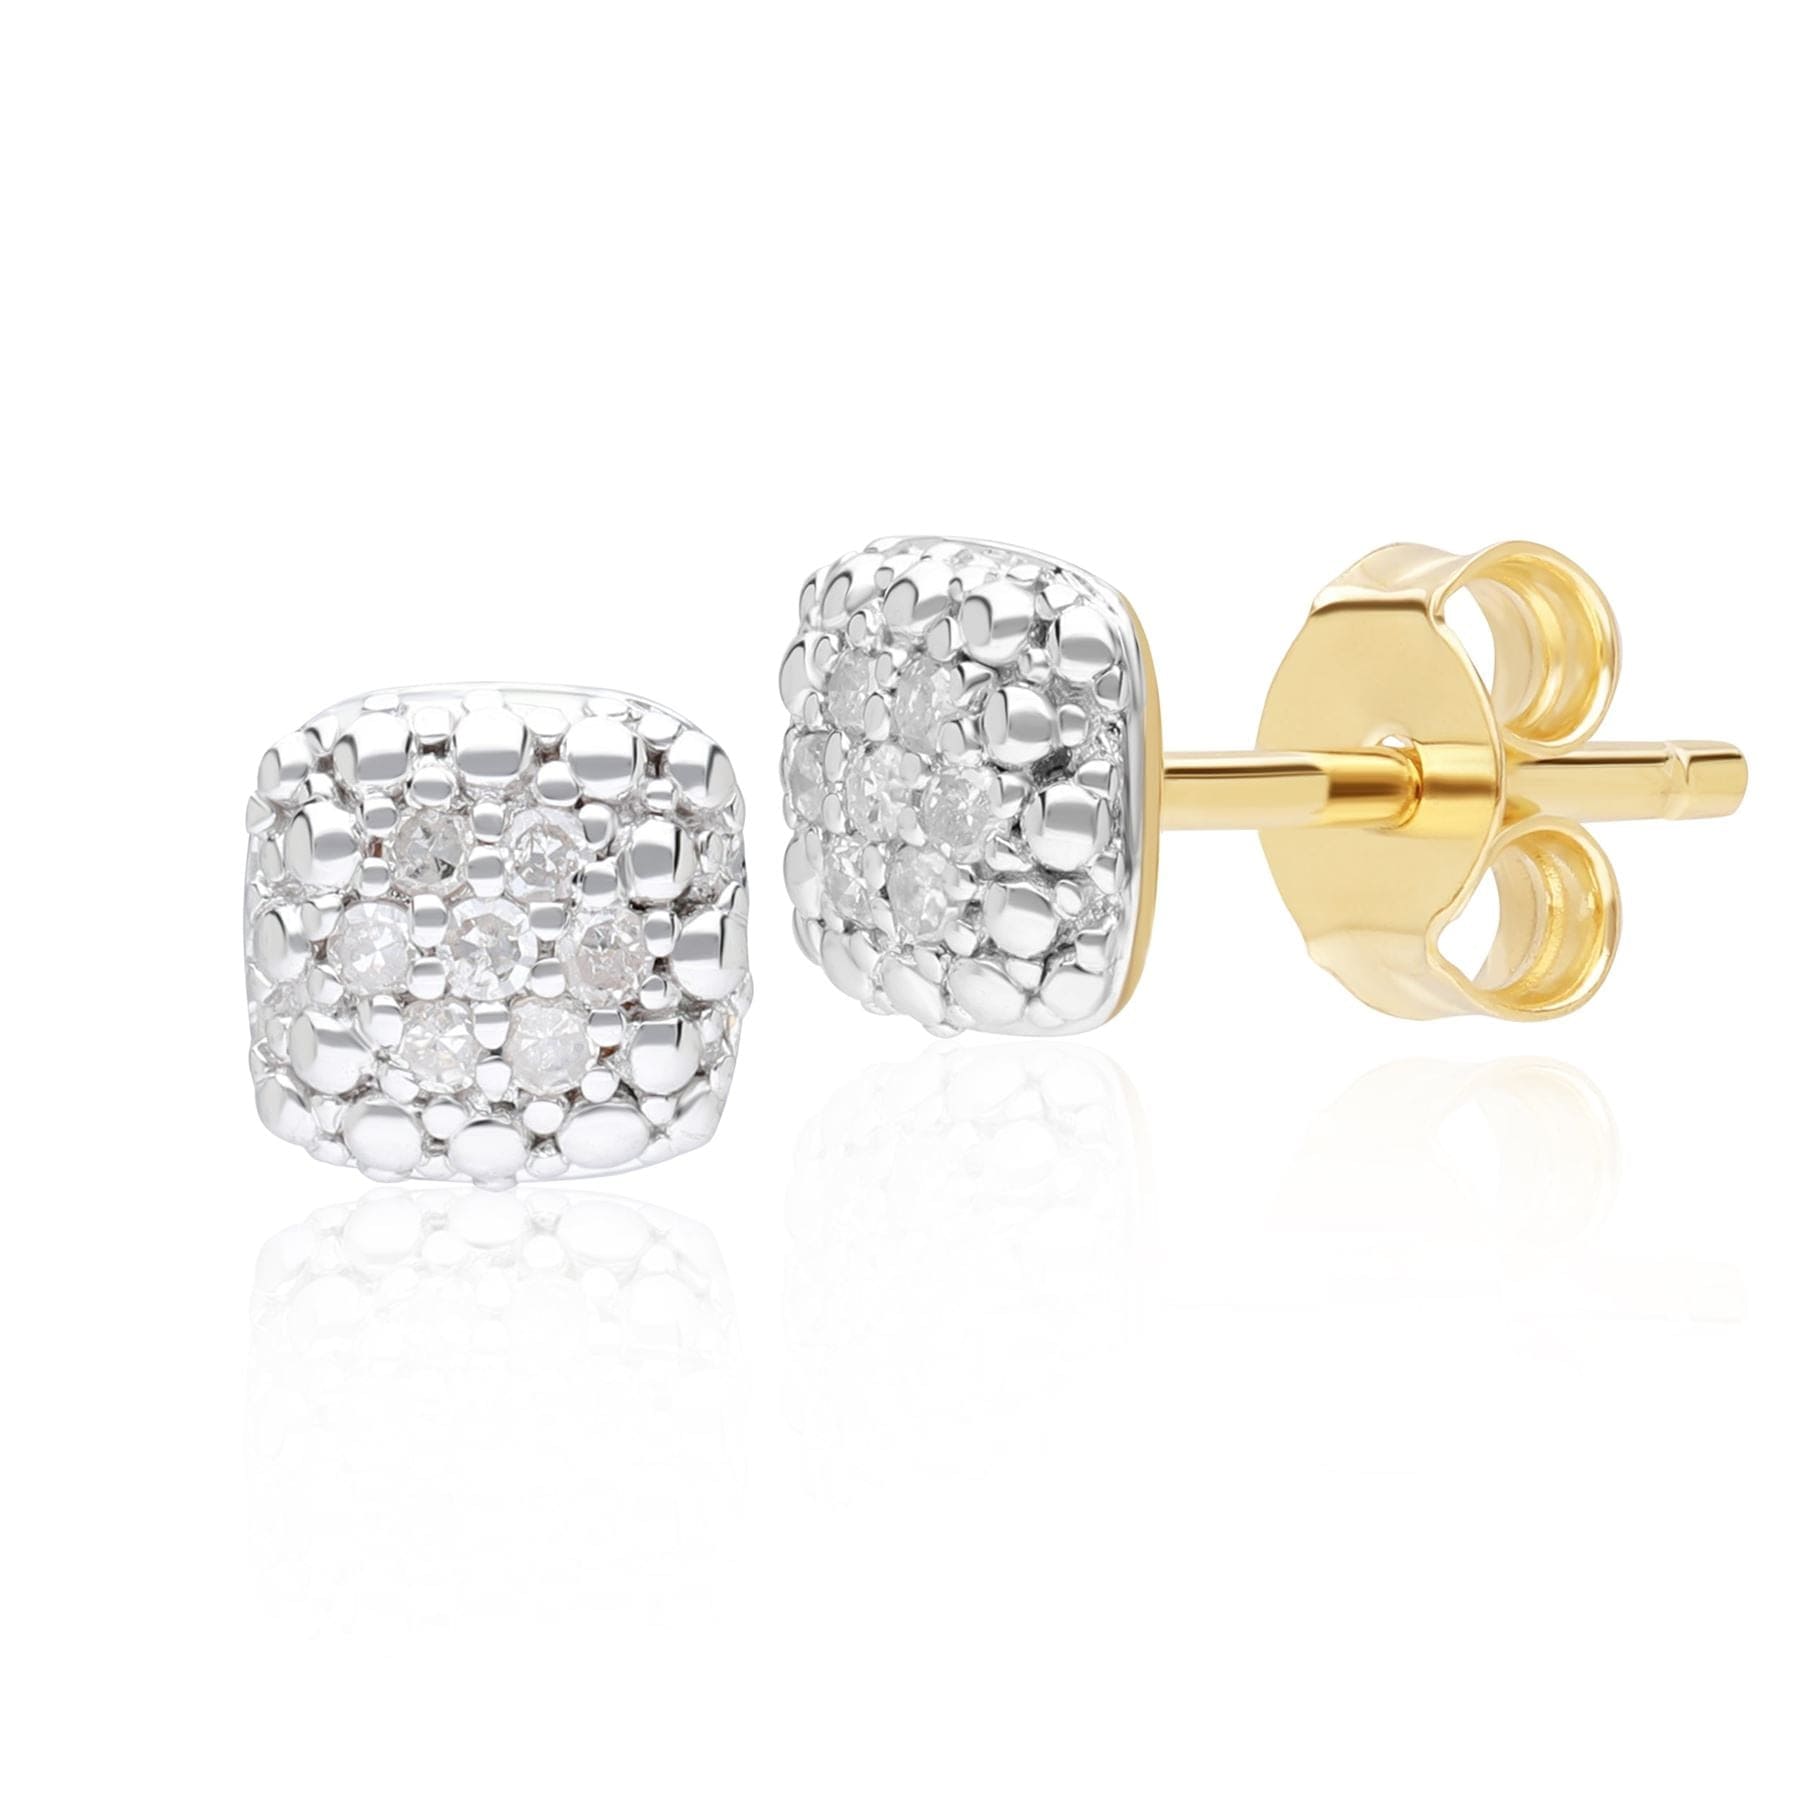 191E0429019 Diamond Pave Square Stud Earrings 9ct Yellow Gold Front